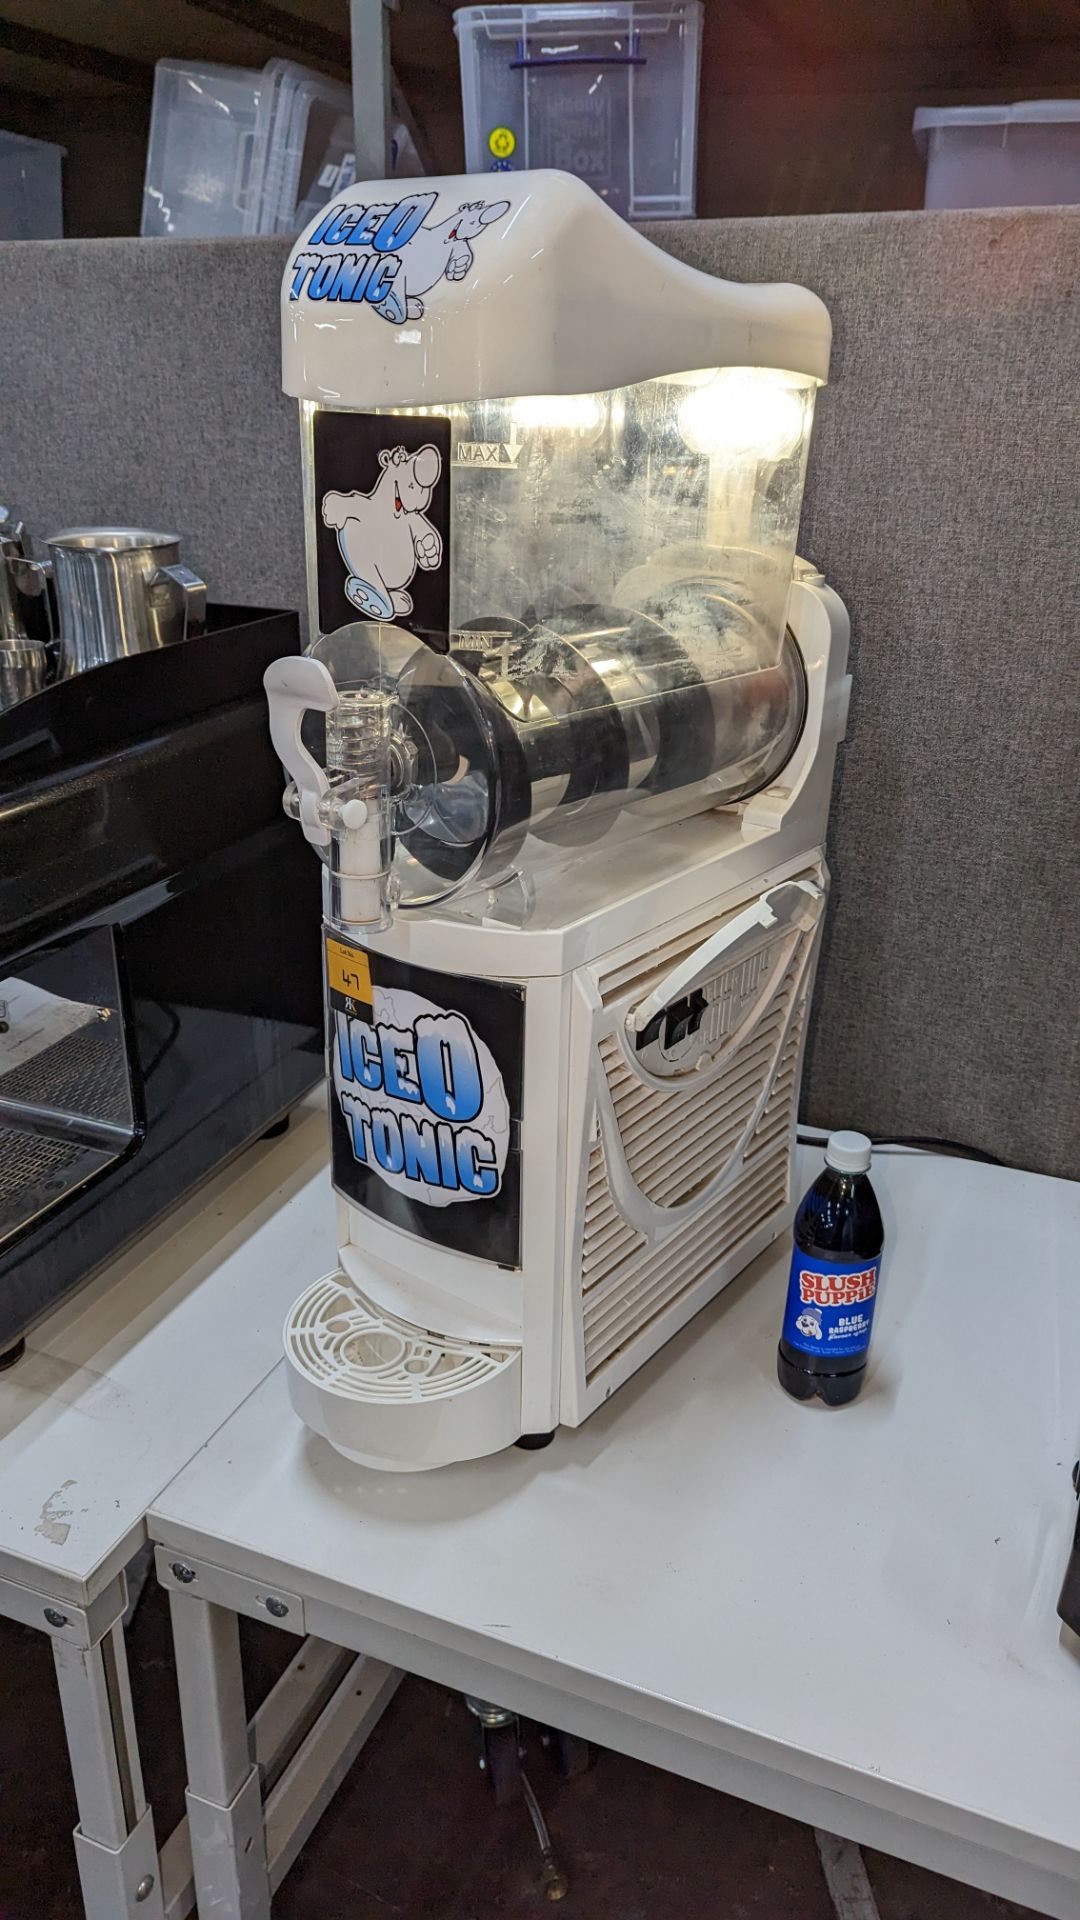 2019 slush drink machine, branded Iceotonic. We cannot find a date of manufacture plaque on the mac - Image 8 of 8